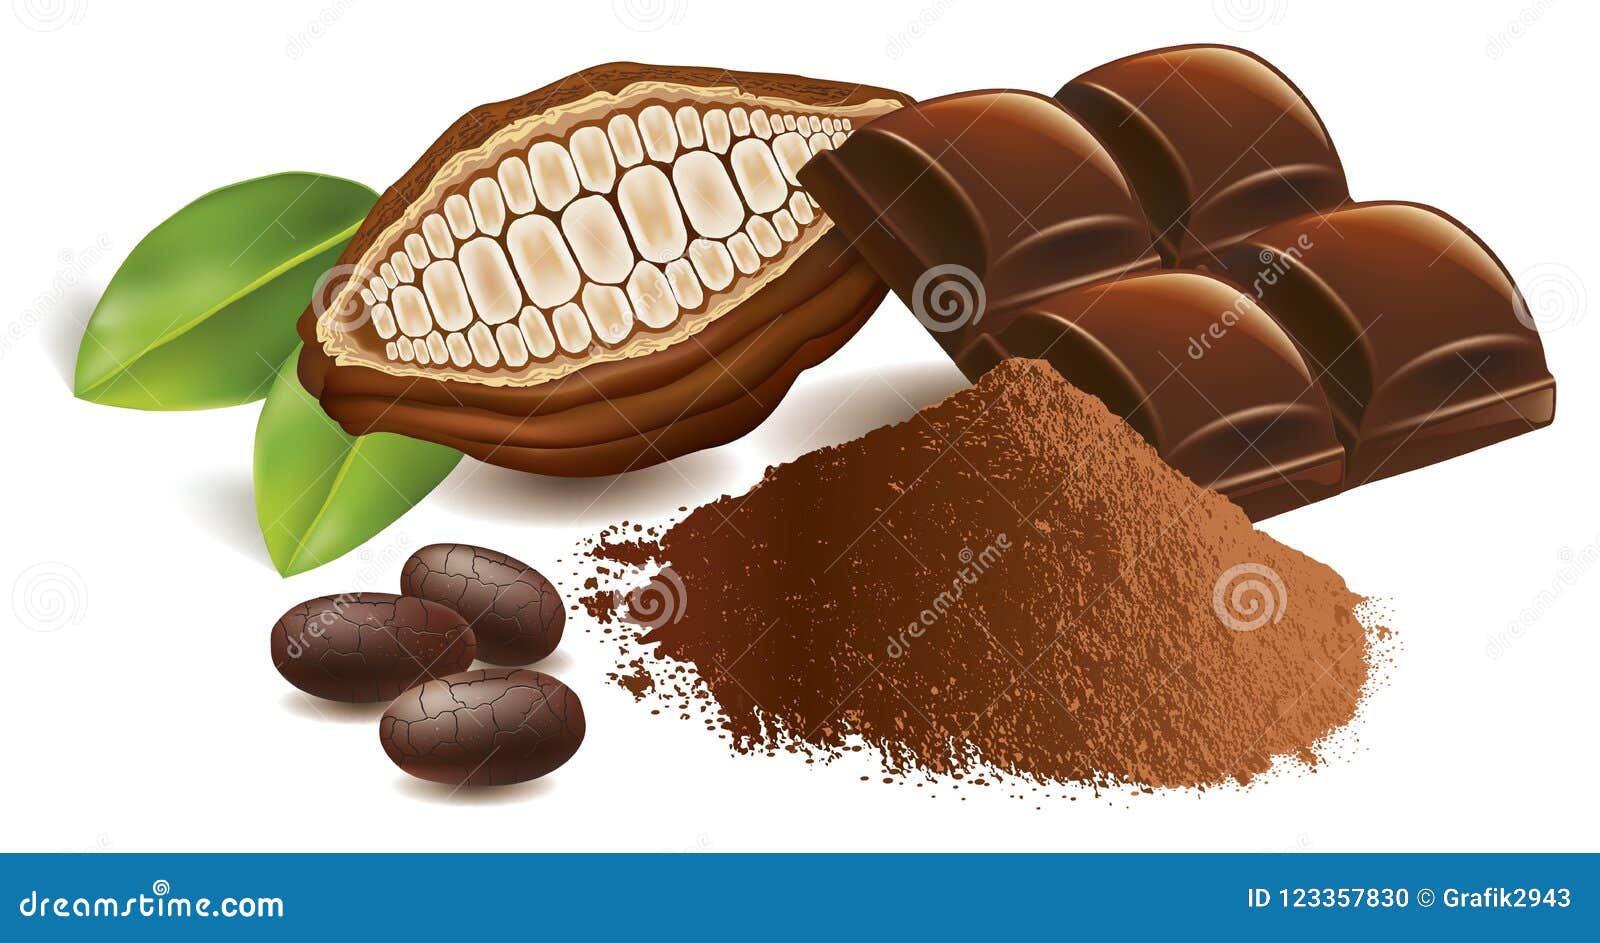 cacao beans with chocolate table and cacao powder